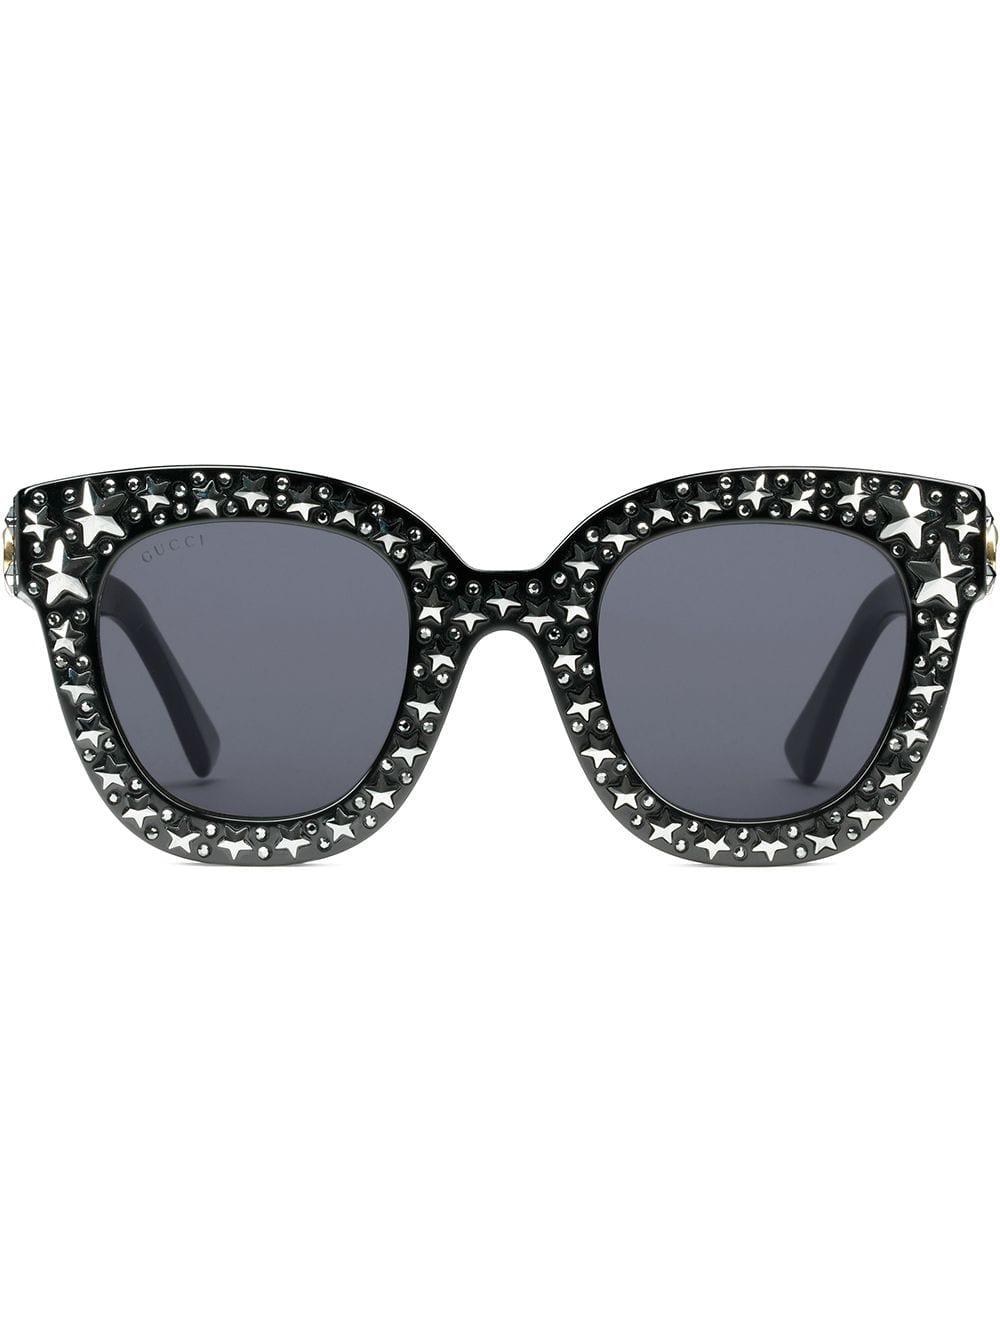 Gucci Star Embellished Sunglasses in Black - Lyst